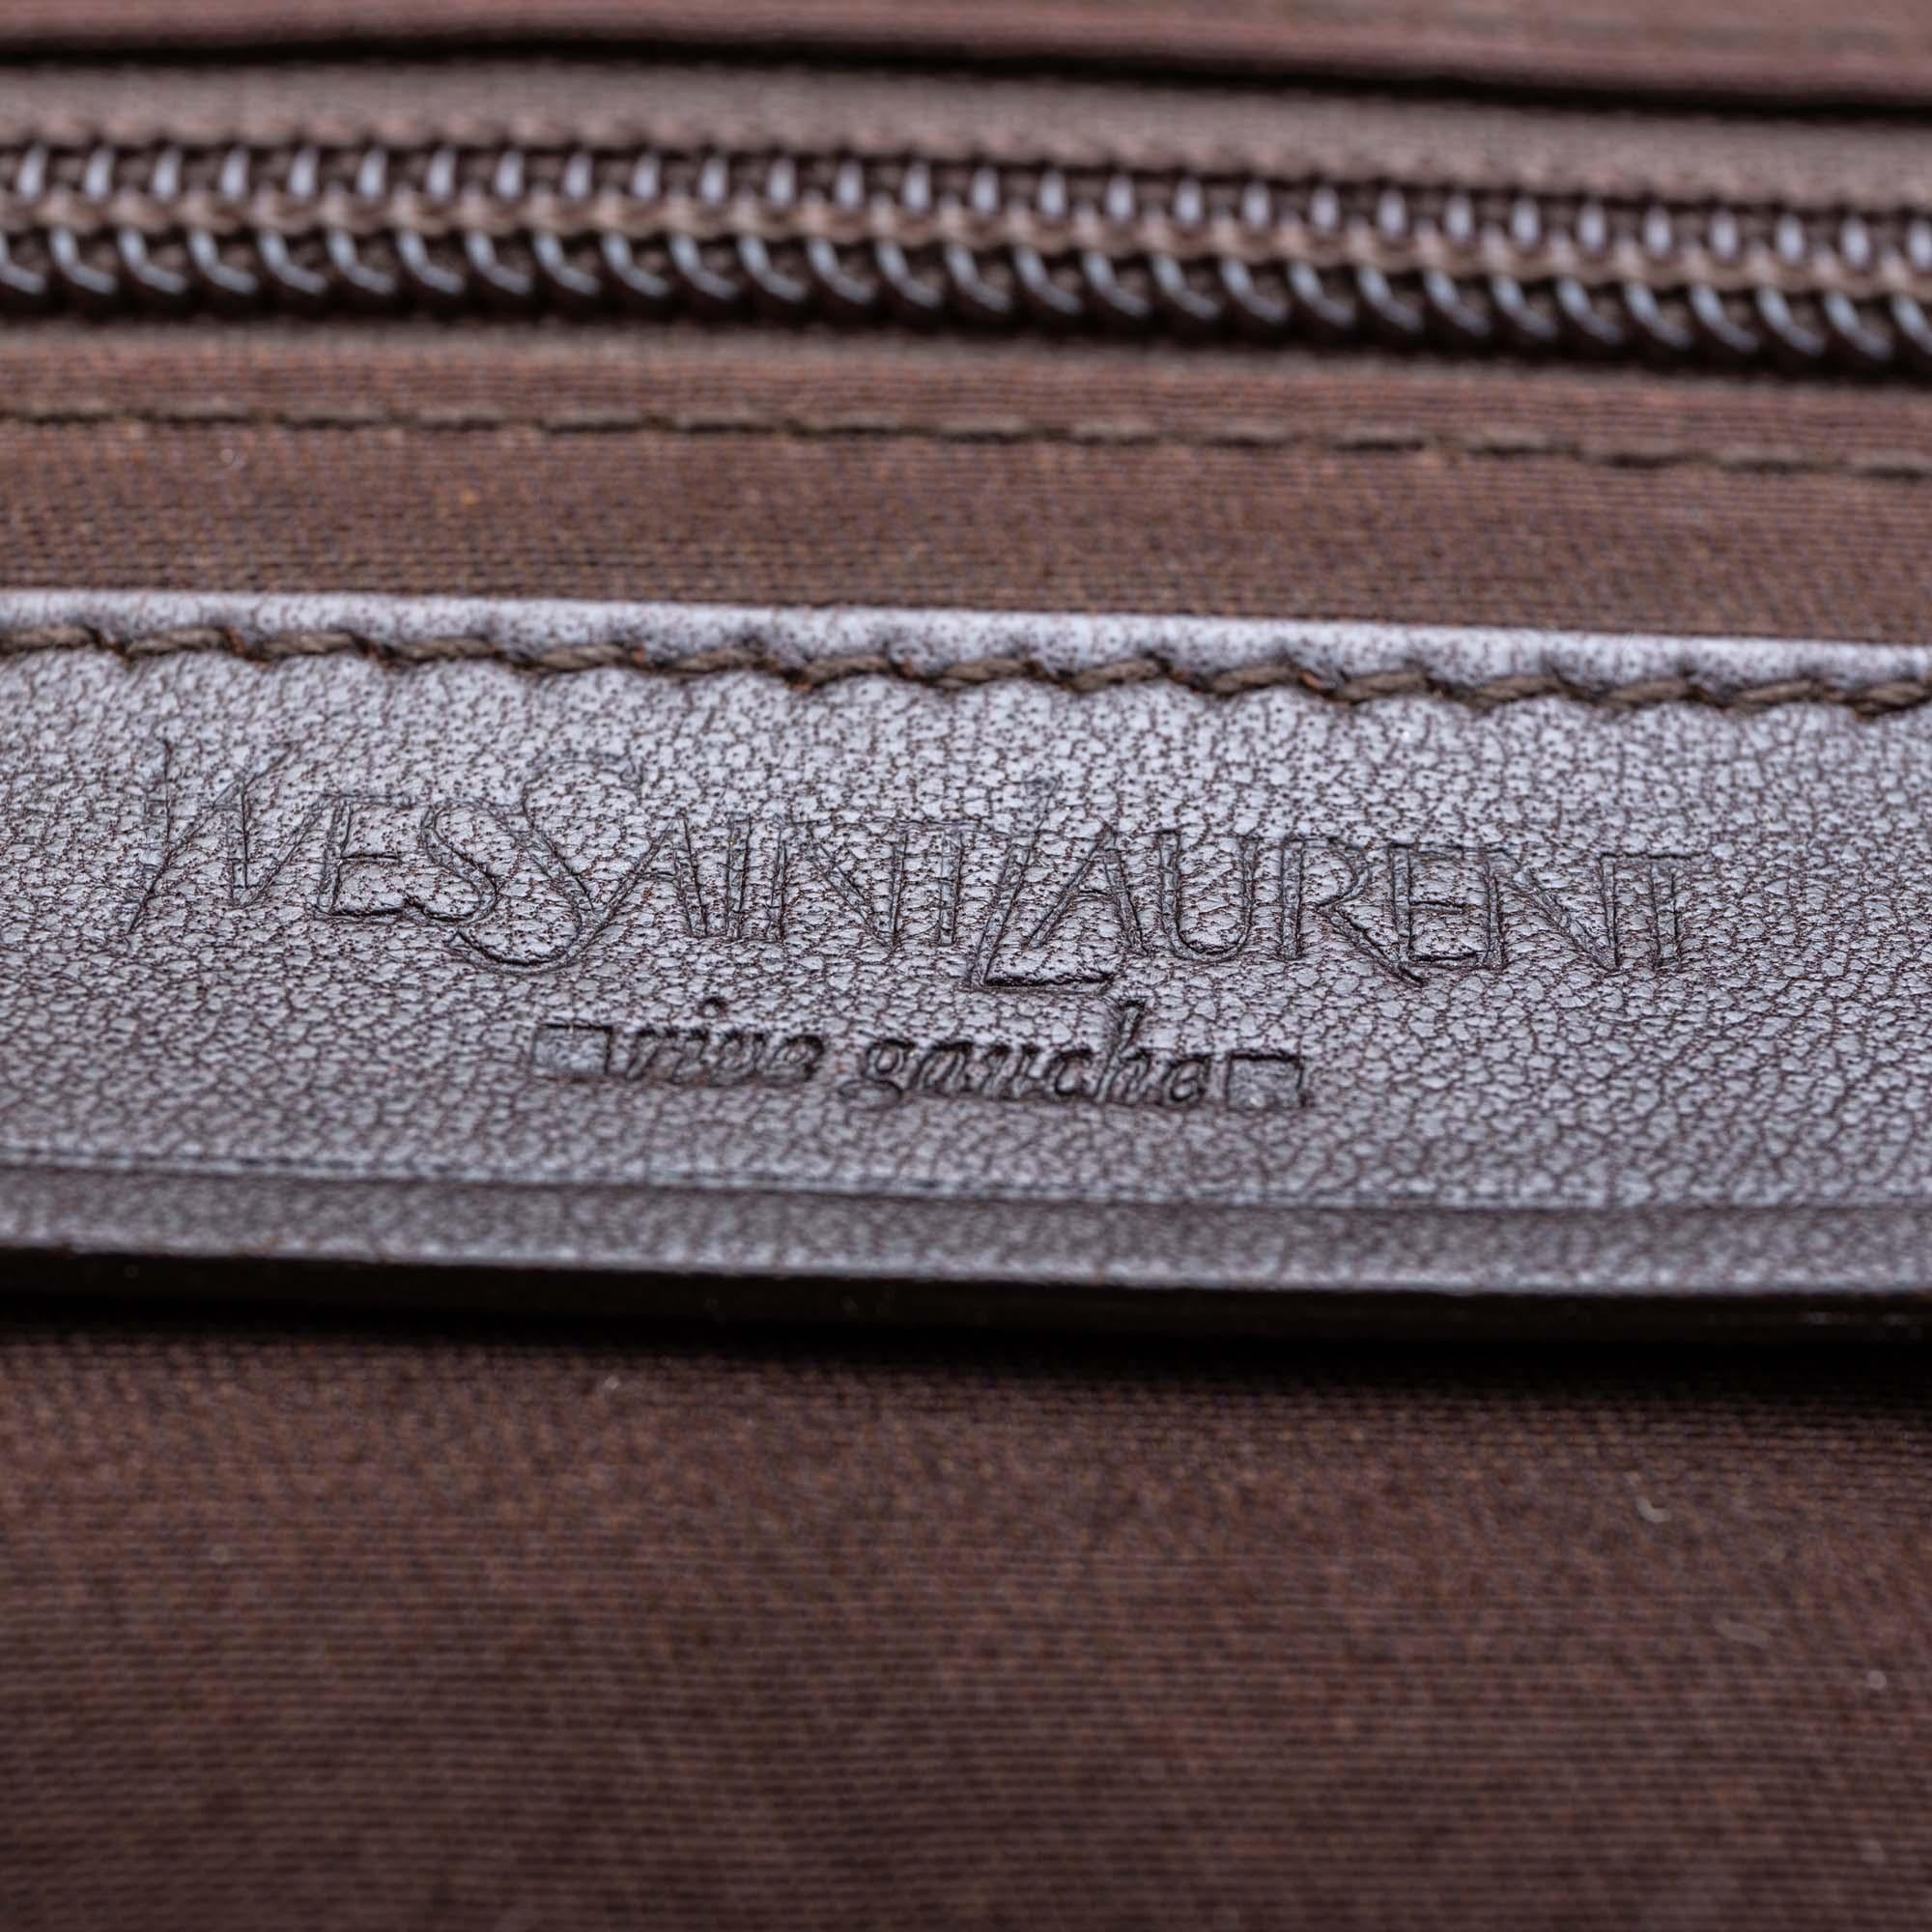 Vintage Authentic YSL Multi Canvas Fabric Printed Travel Bag France LARGE  For Sale 2